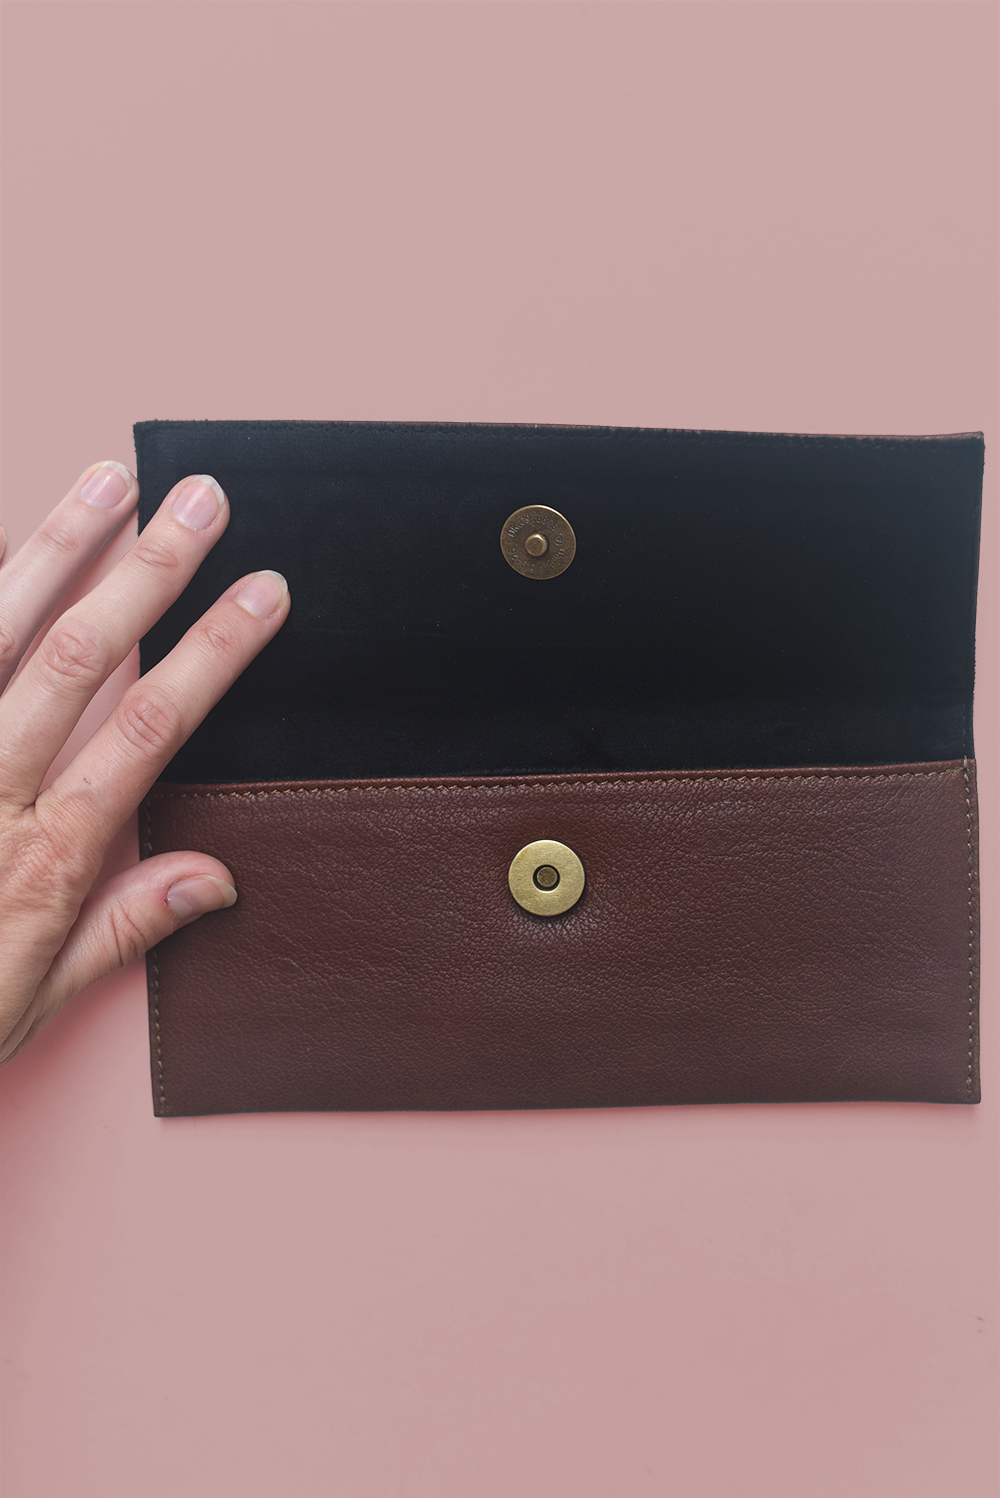 Sunglasses Case in Brown Leather from Indai